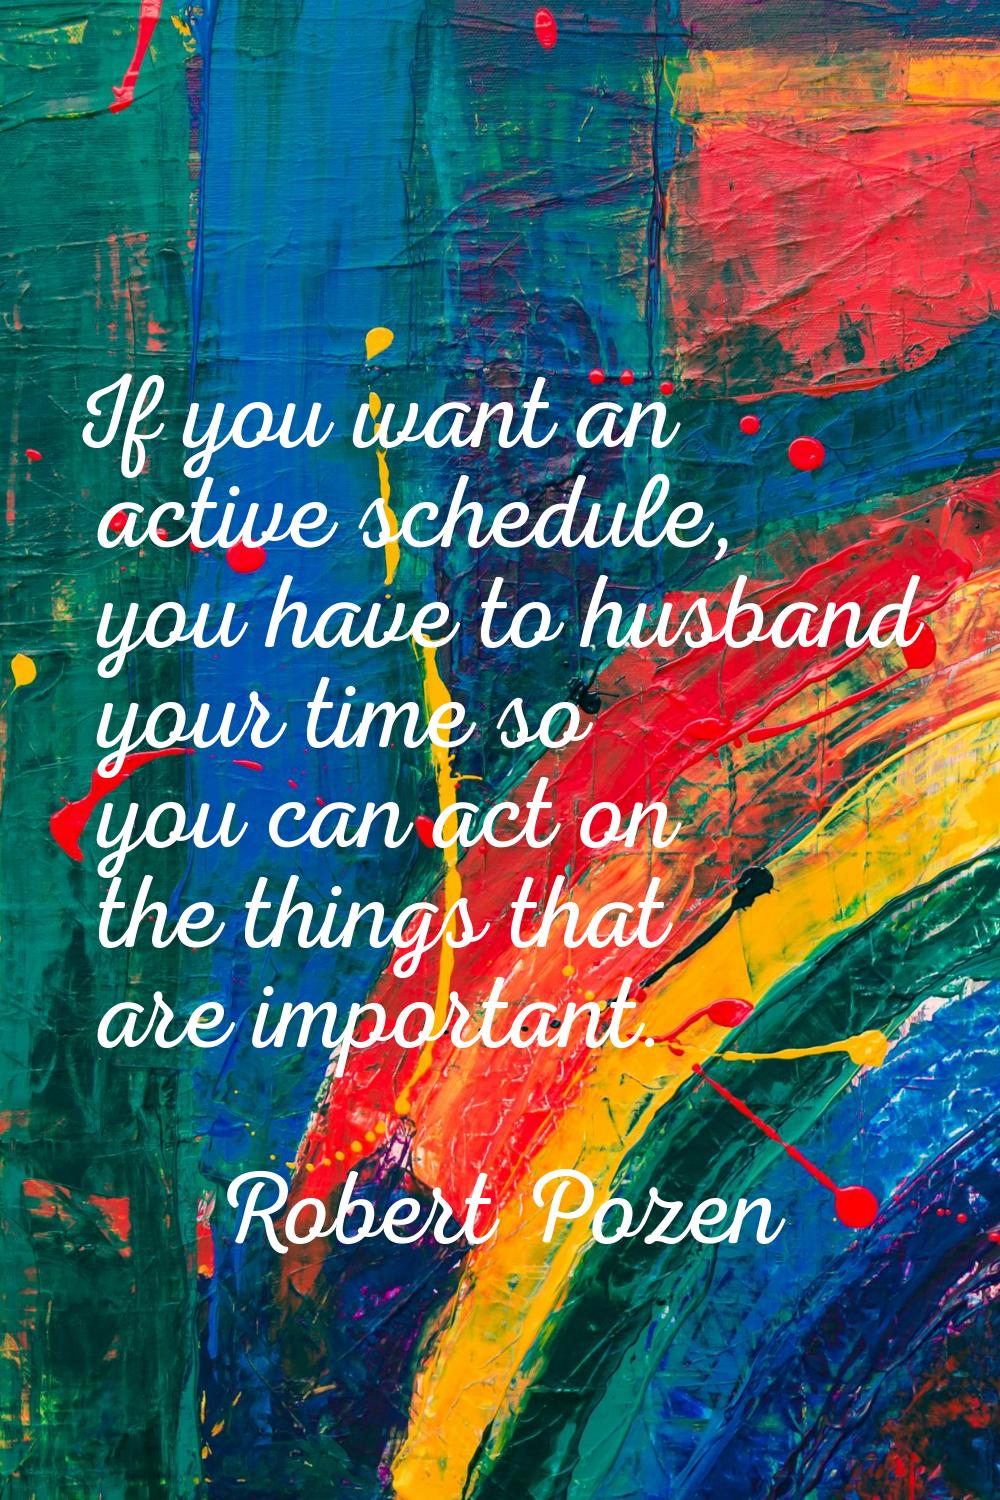 If you want an active schedule, you have to husband your time so you can act on the things that are